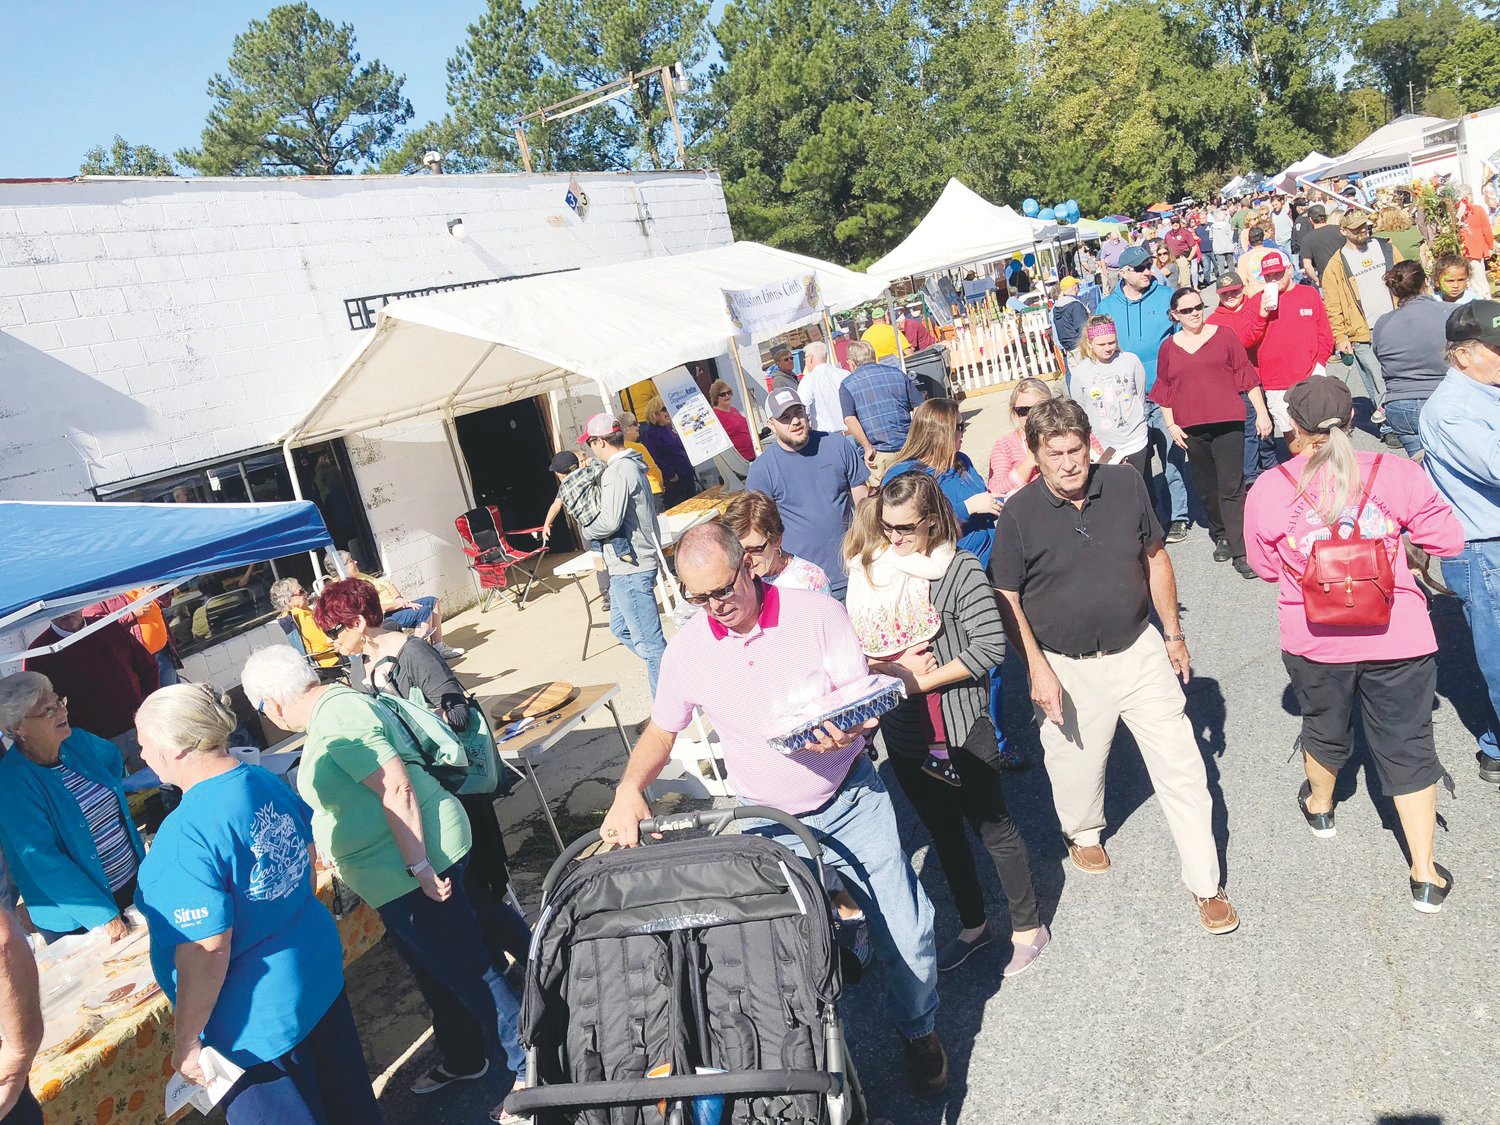 The annual Old Fashion Day in Goldston — shown here from 2018 — was canceled in 2021 not because of COVID-19, as was the case in 2020, but because of weather.